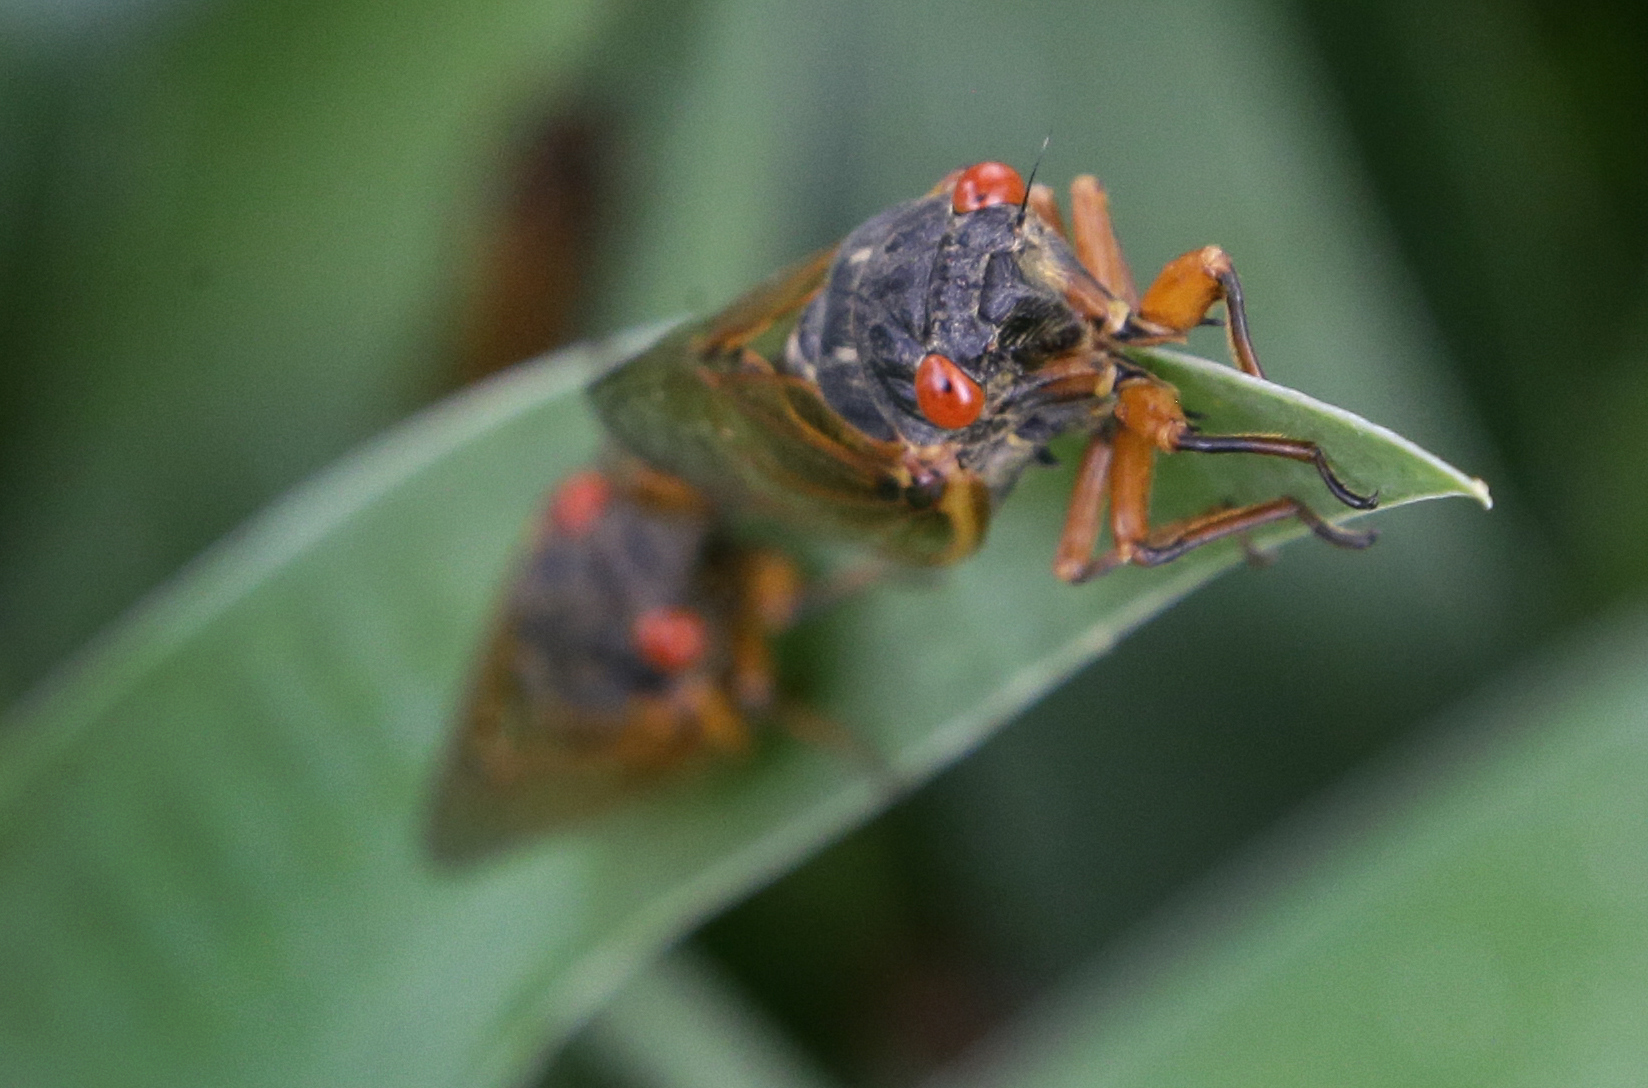 Spotted: Periodical cicadas in southern Wisconsin